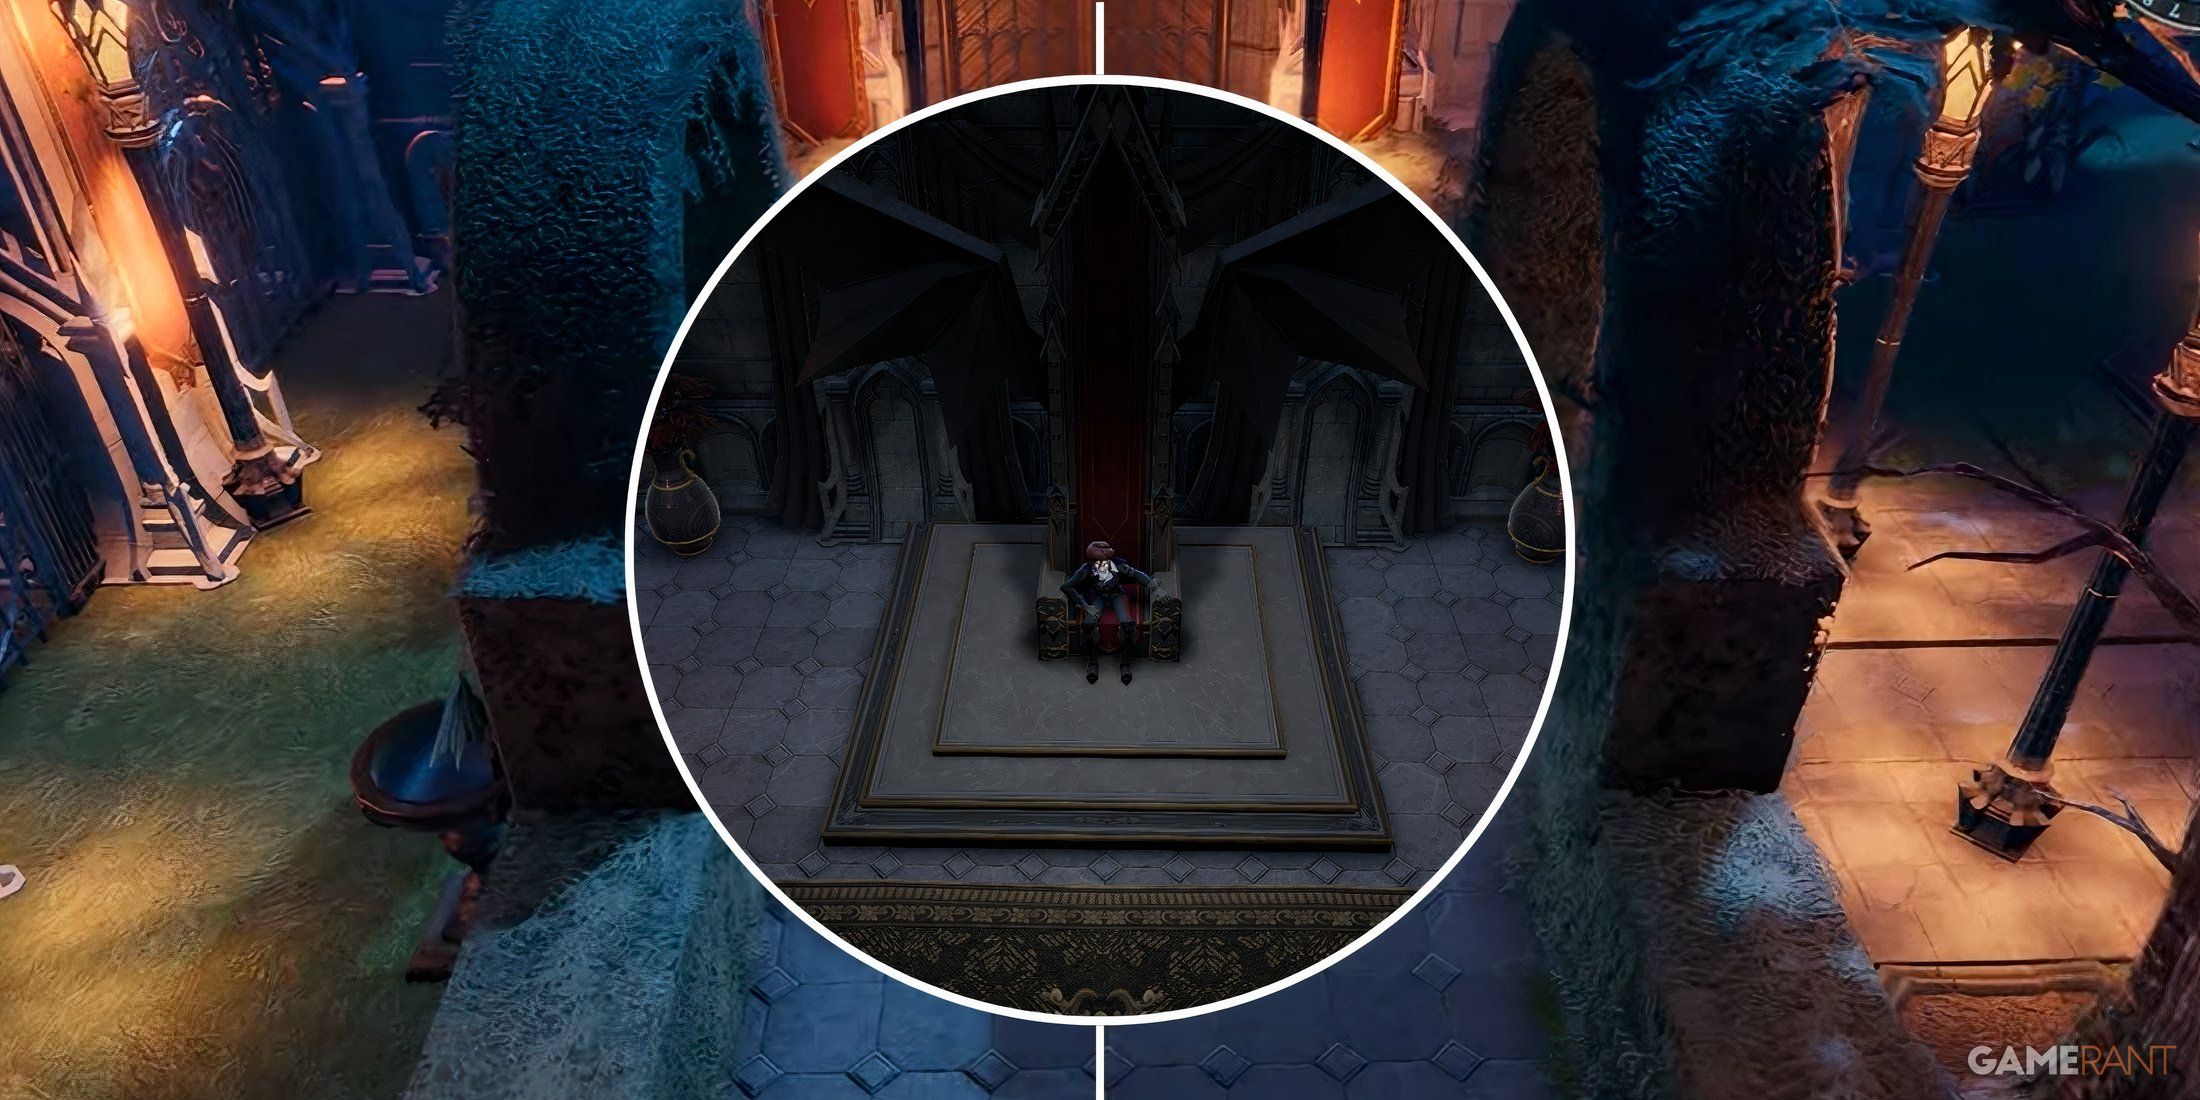 A view of a castle exterior behind a screenshot of a player character sitting on their vampiric throne